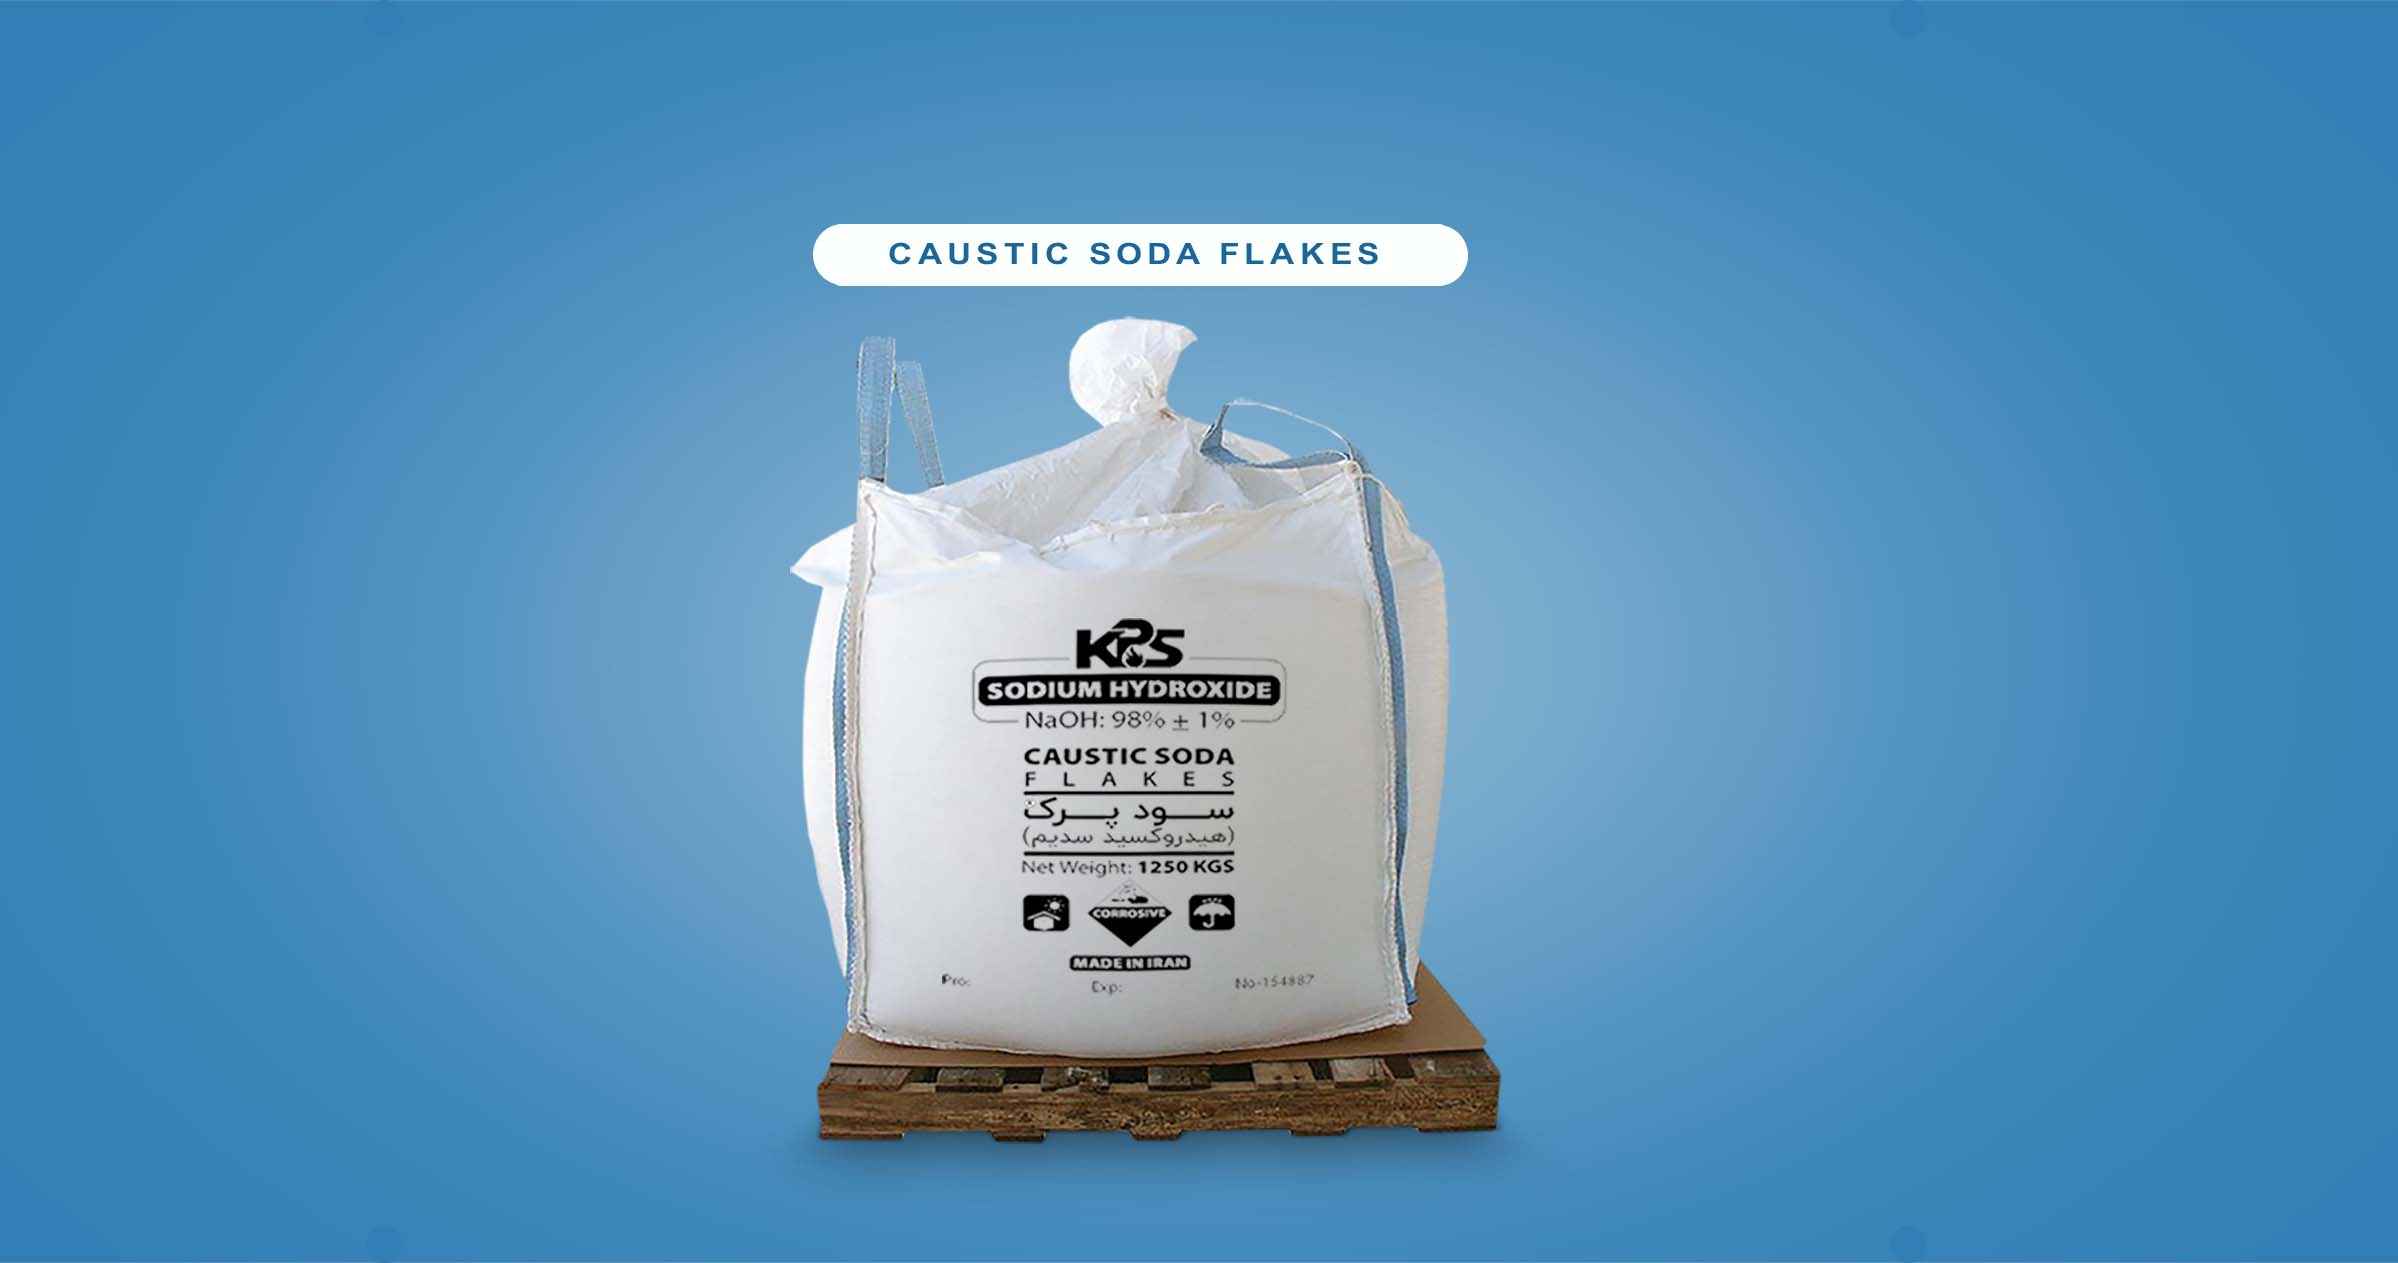 Caustic Soda in Laundry Products